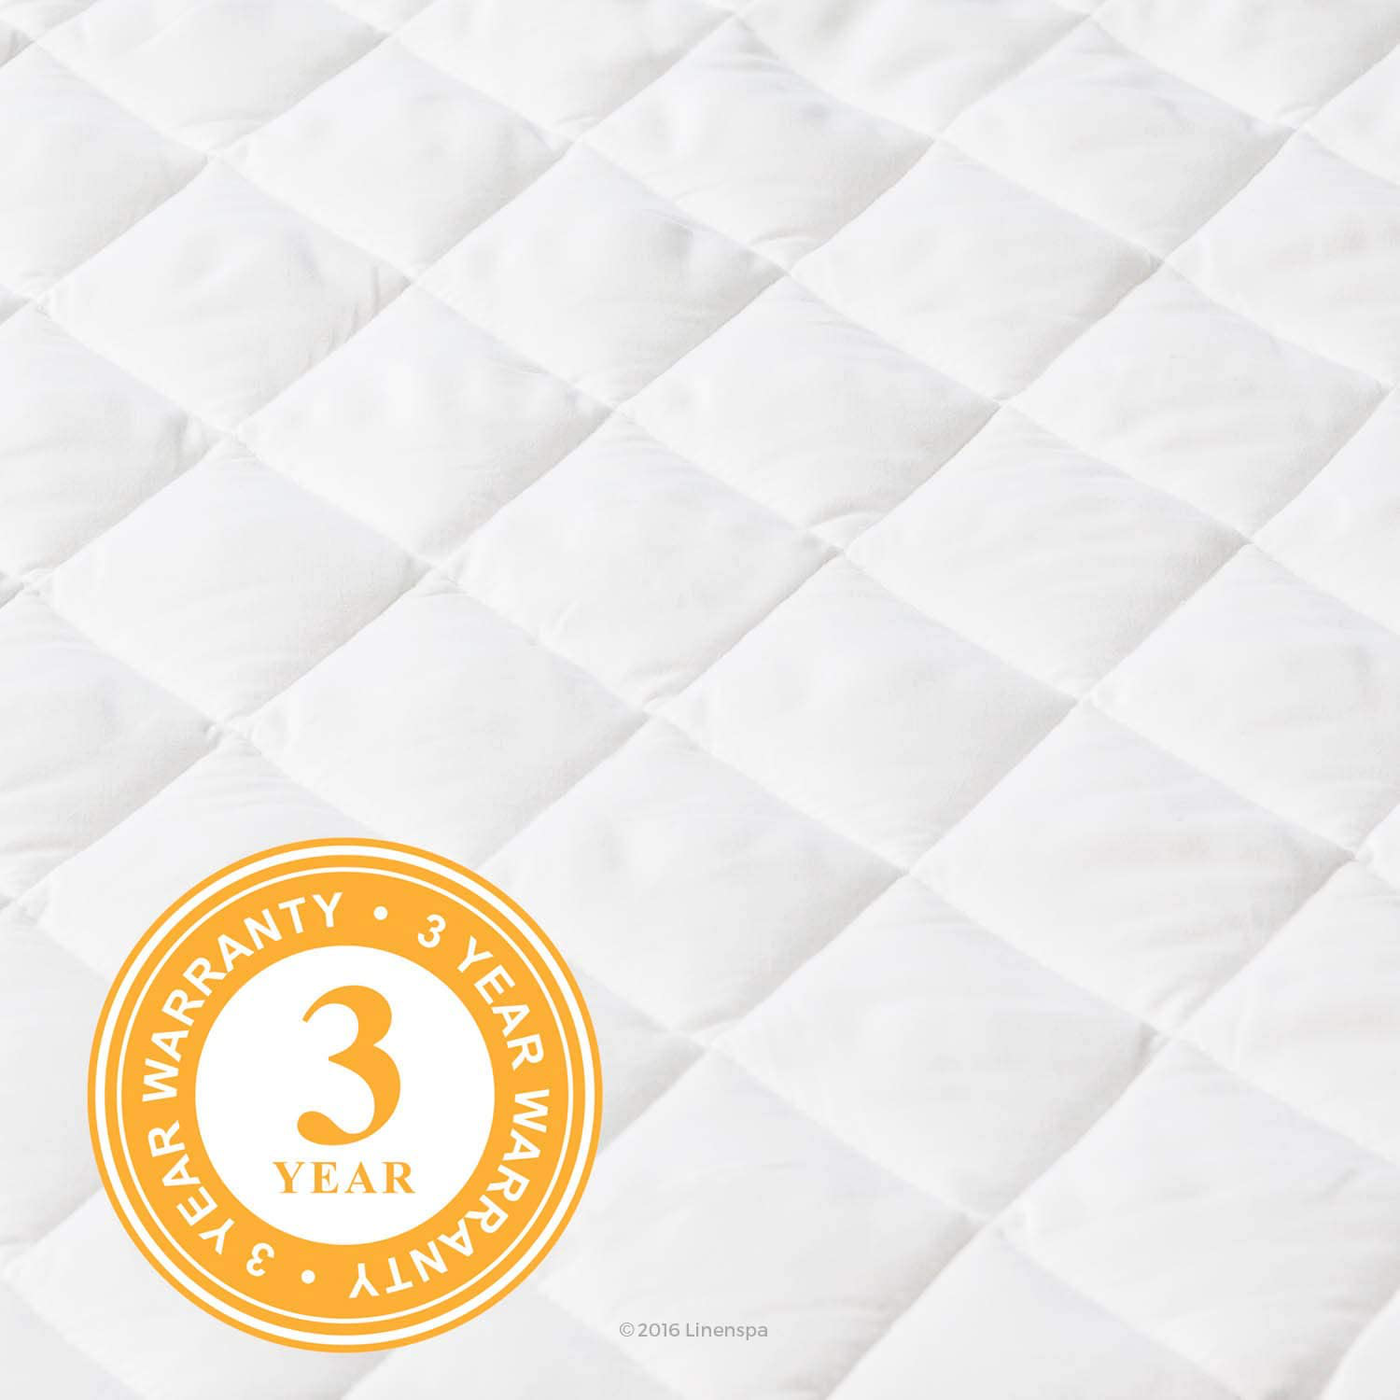 Linenspa Waterproof Quilted Mattress Pad - Hypoallergenic Fill - Deep Pocket Fitted Skirt - California King